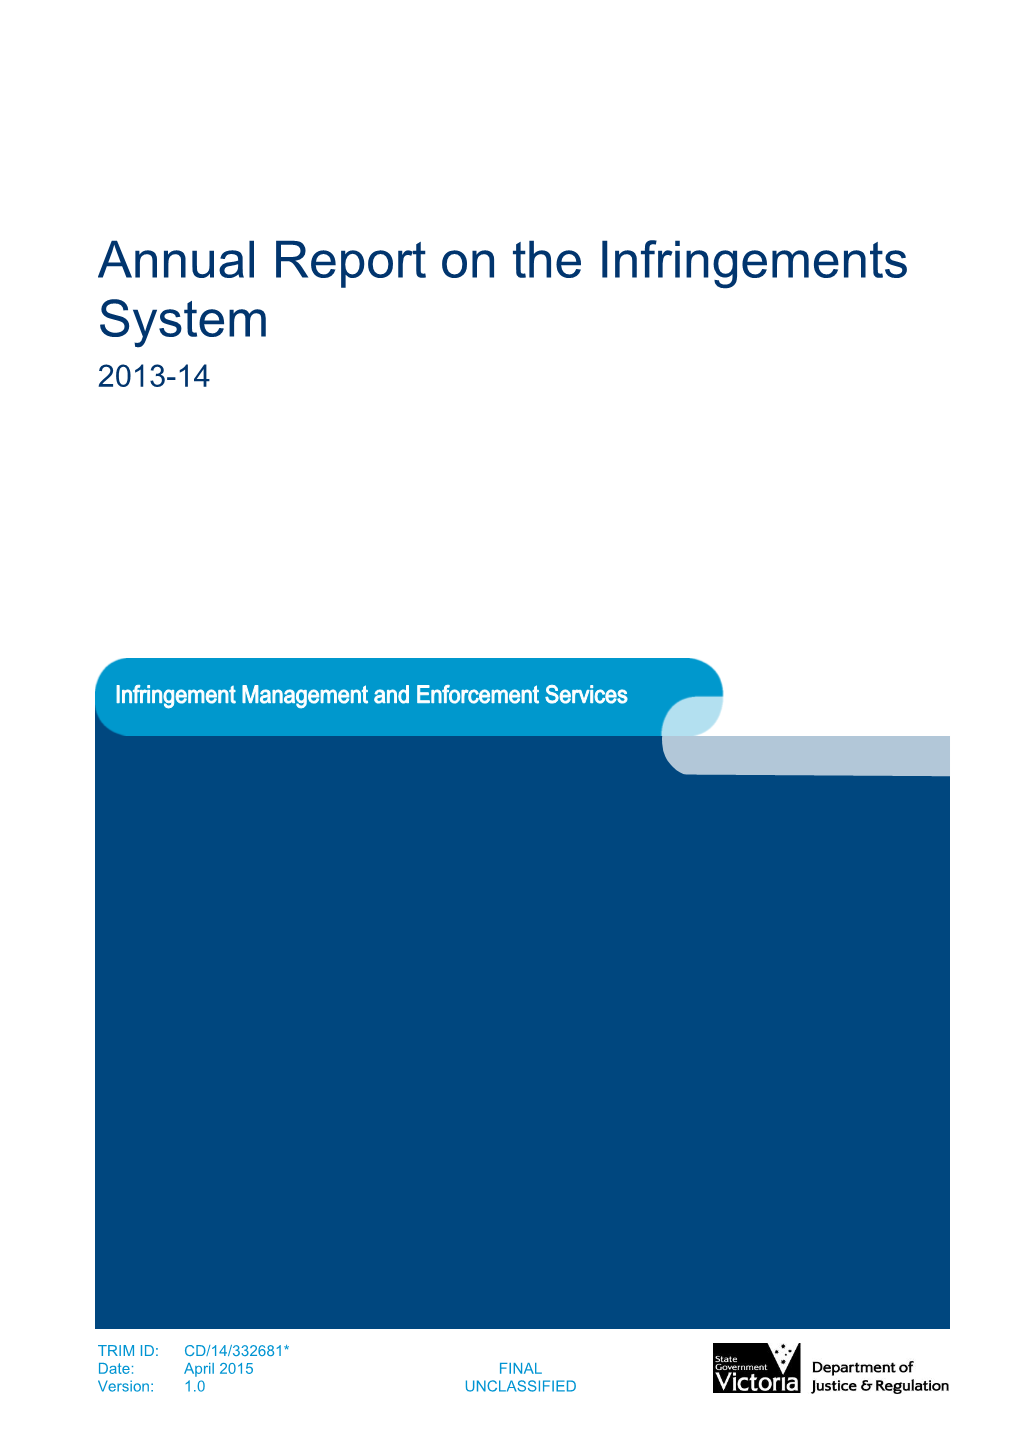 Annual Report on the Infringements System 2013-14